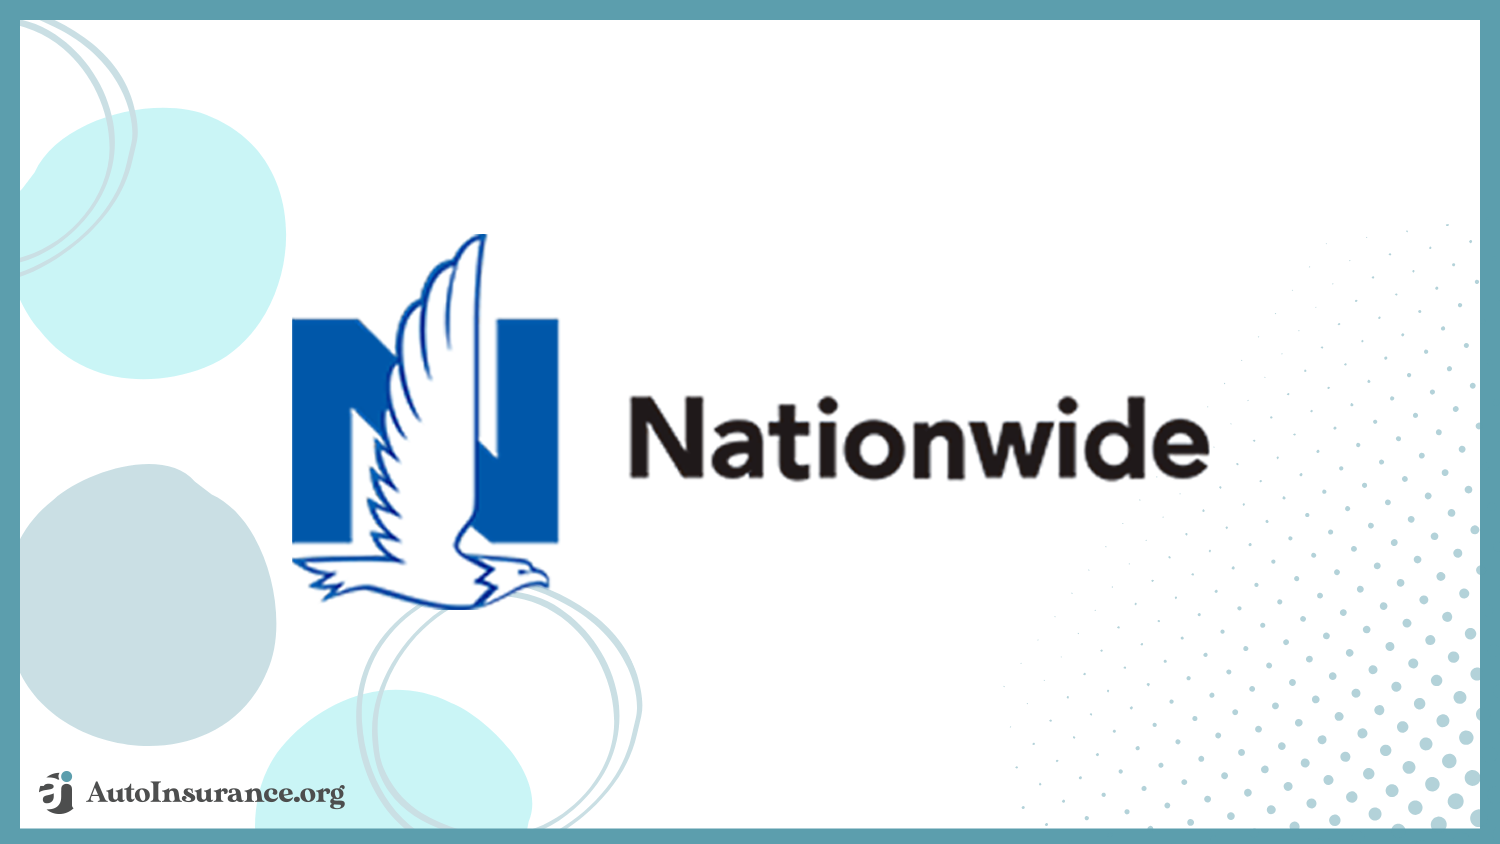 auto insurance companies with the best customer service: Nationwide